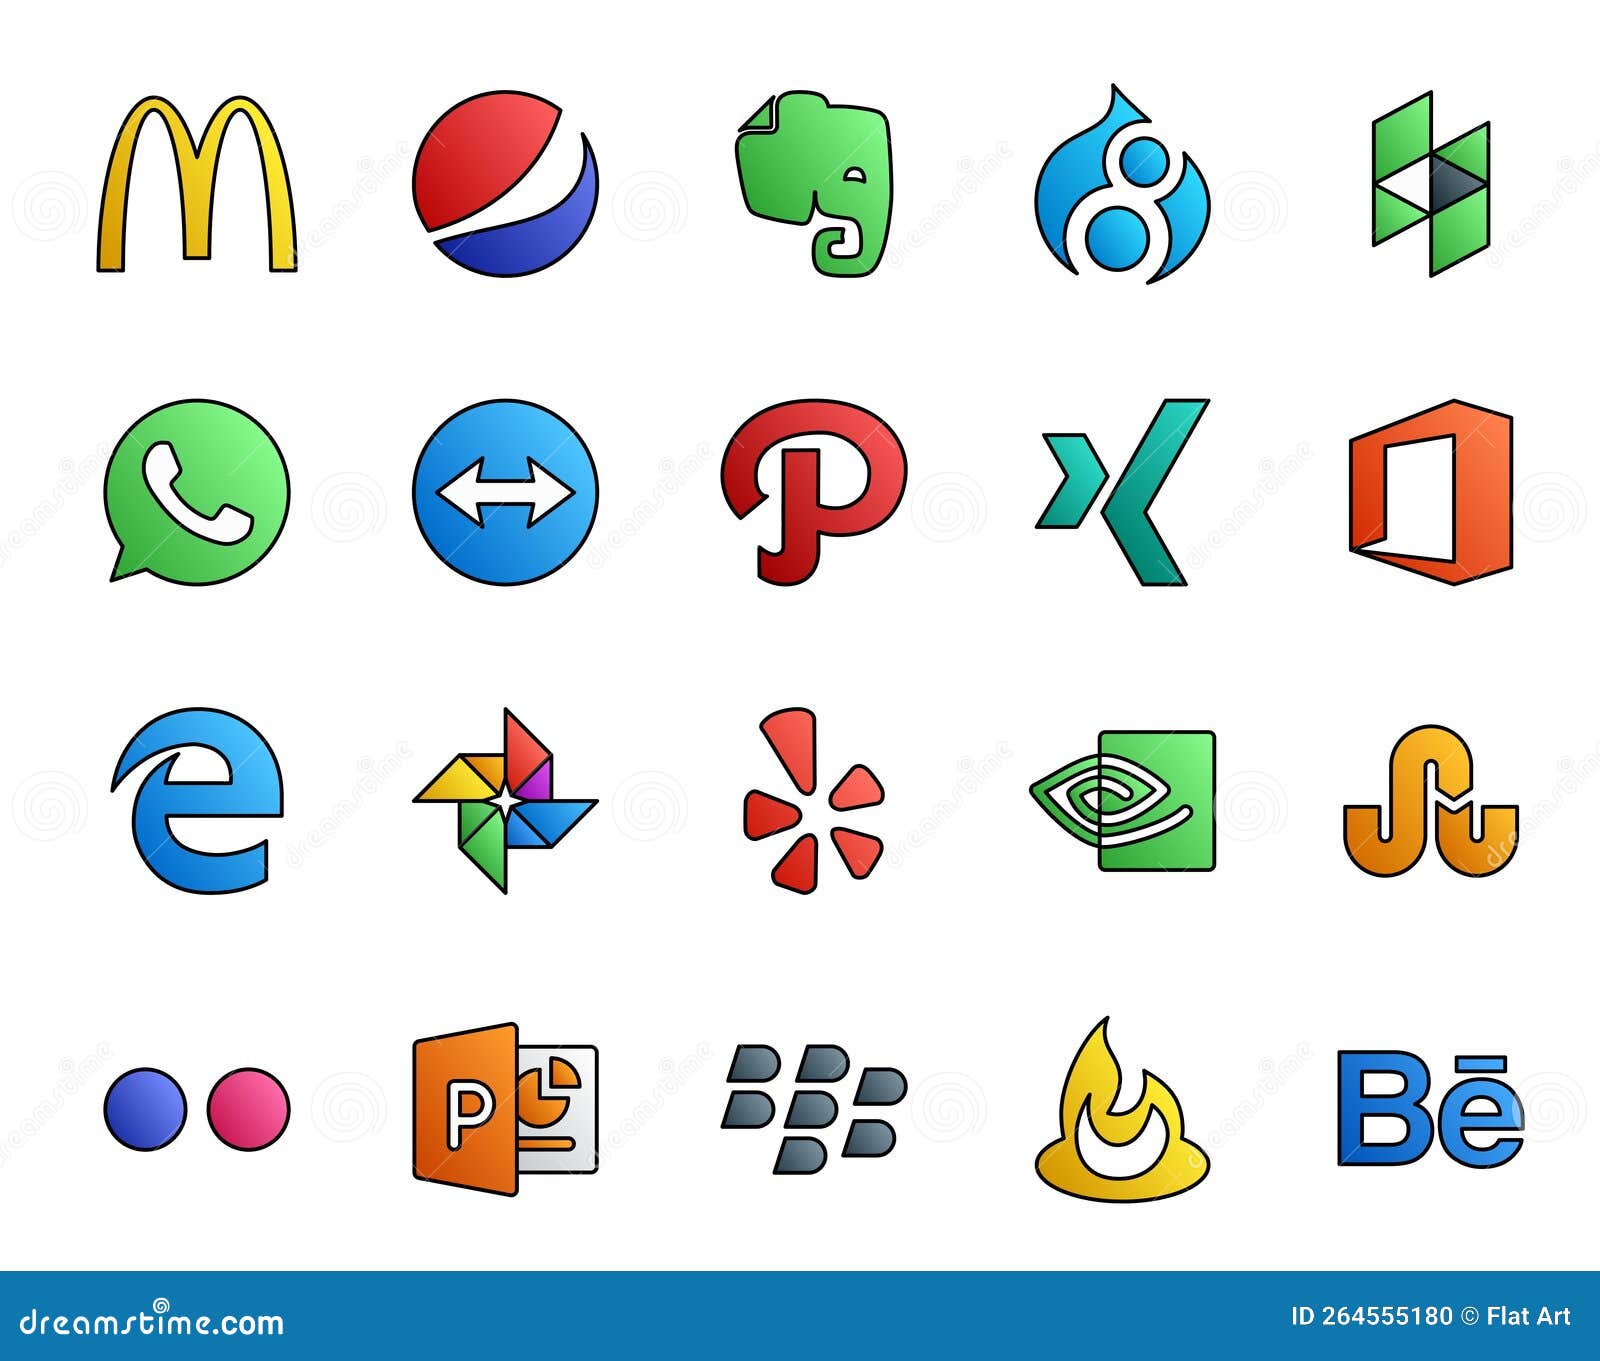 20 social media icon pack including blackberry. flickr. xing. stumbleupon. yelp